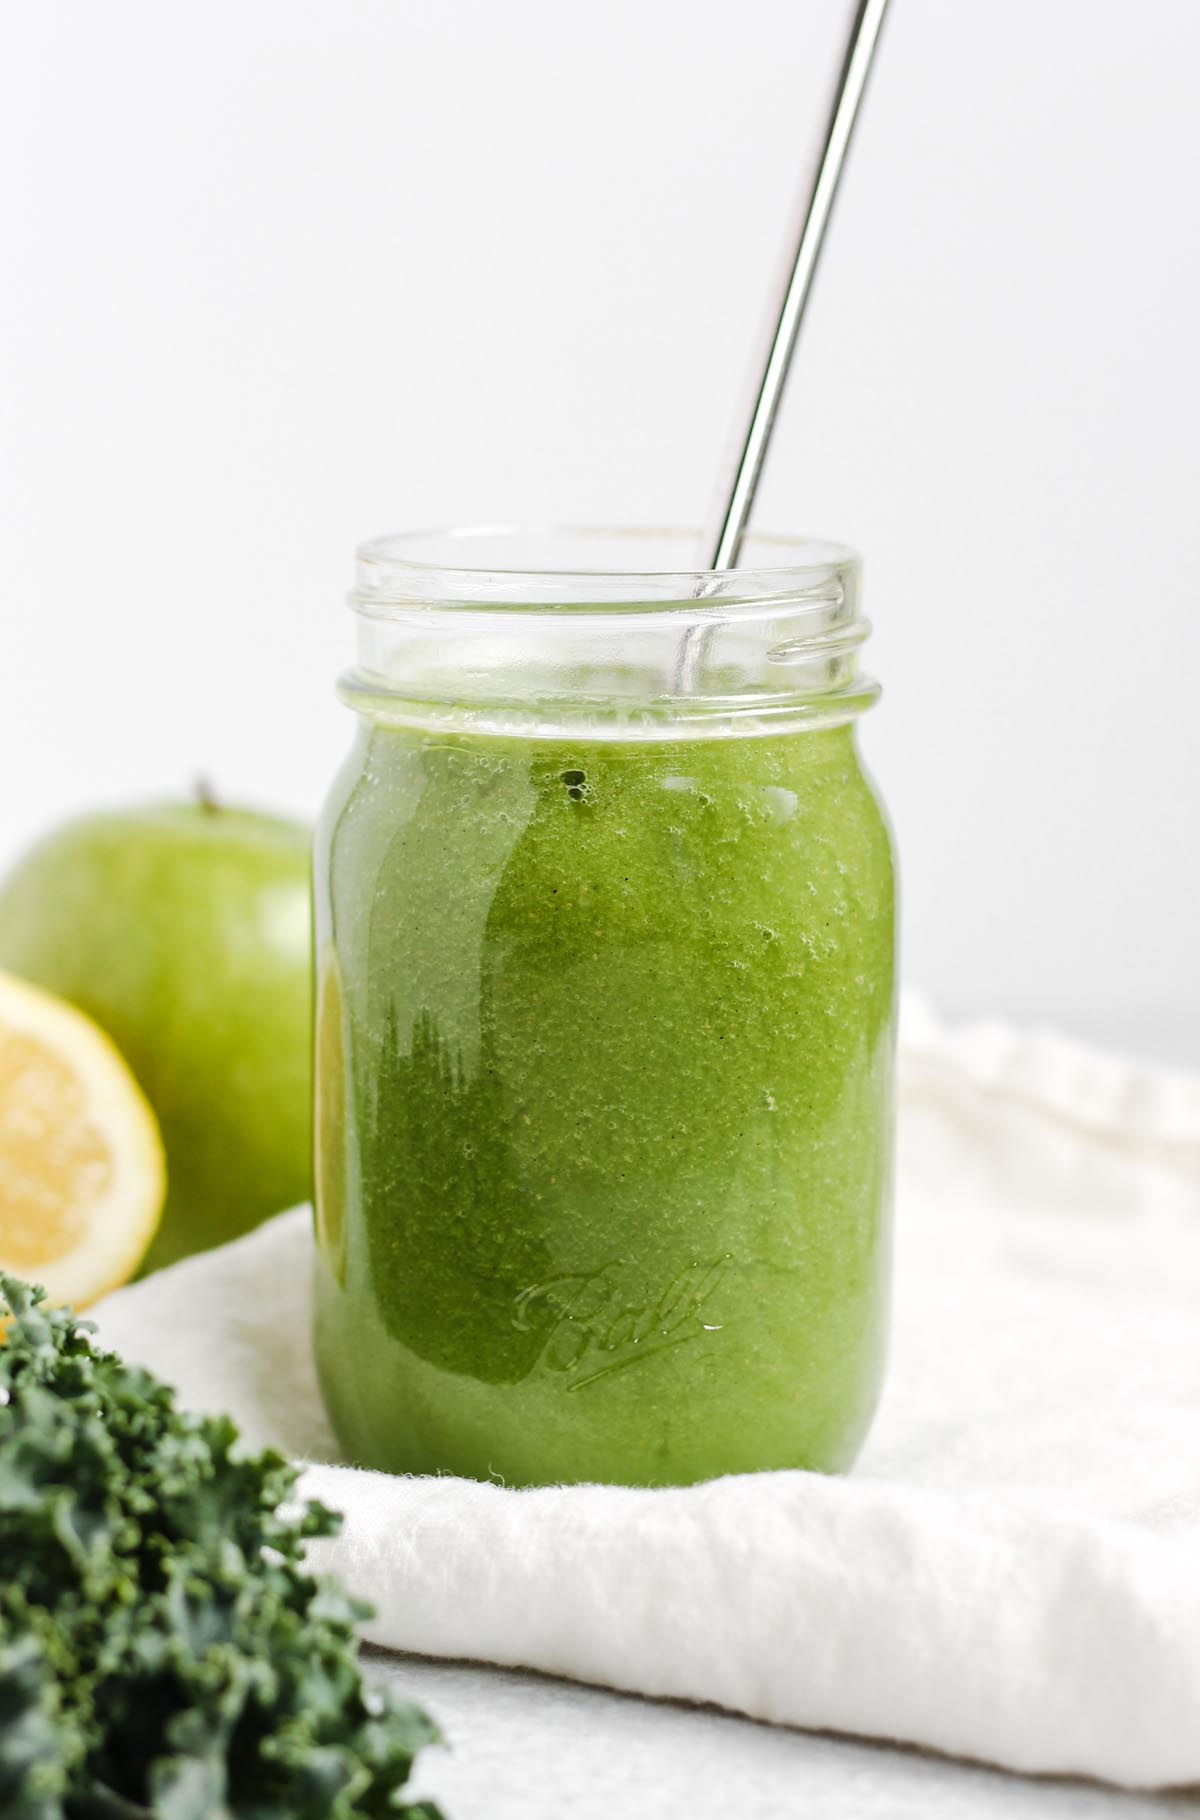 Apple kiwi kale smoothie in a mason jar with a stainless steel straw.